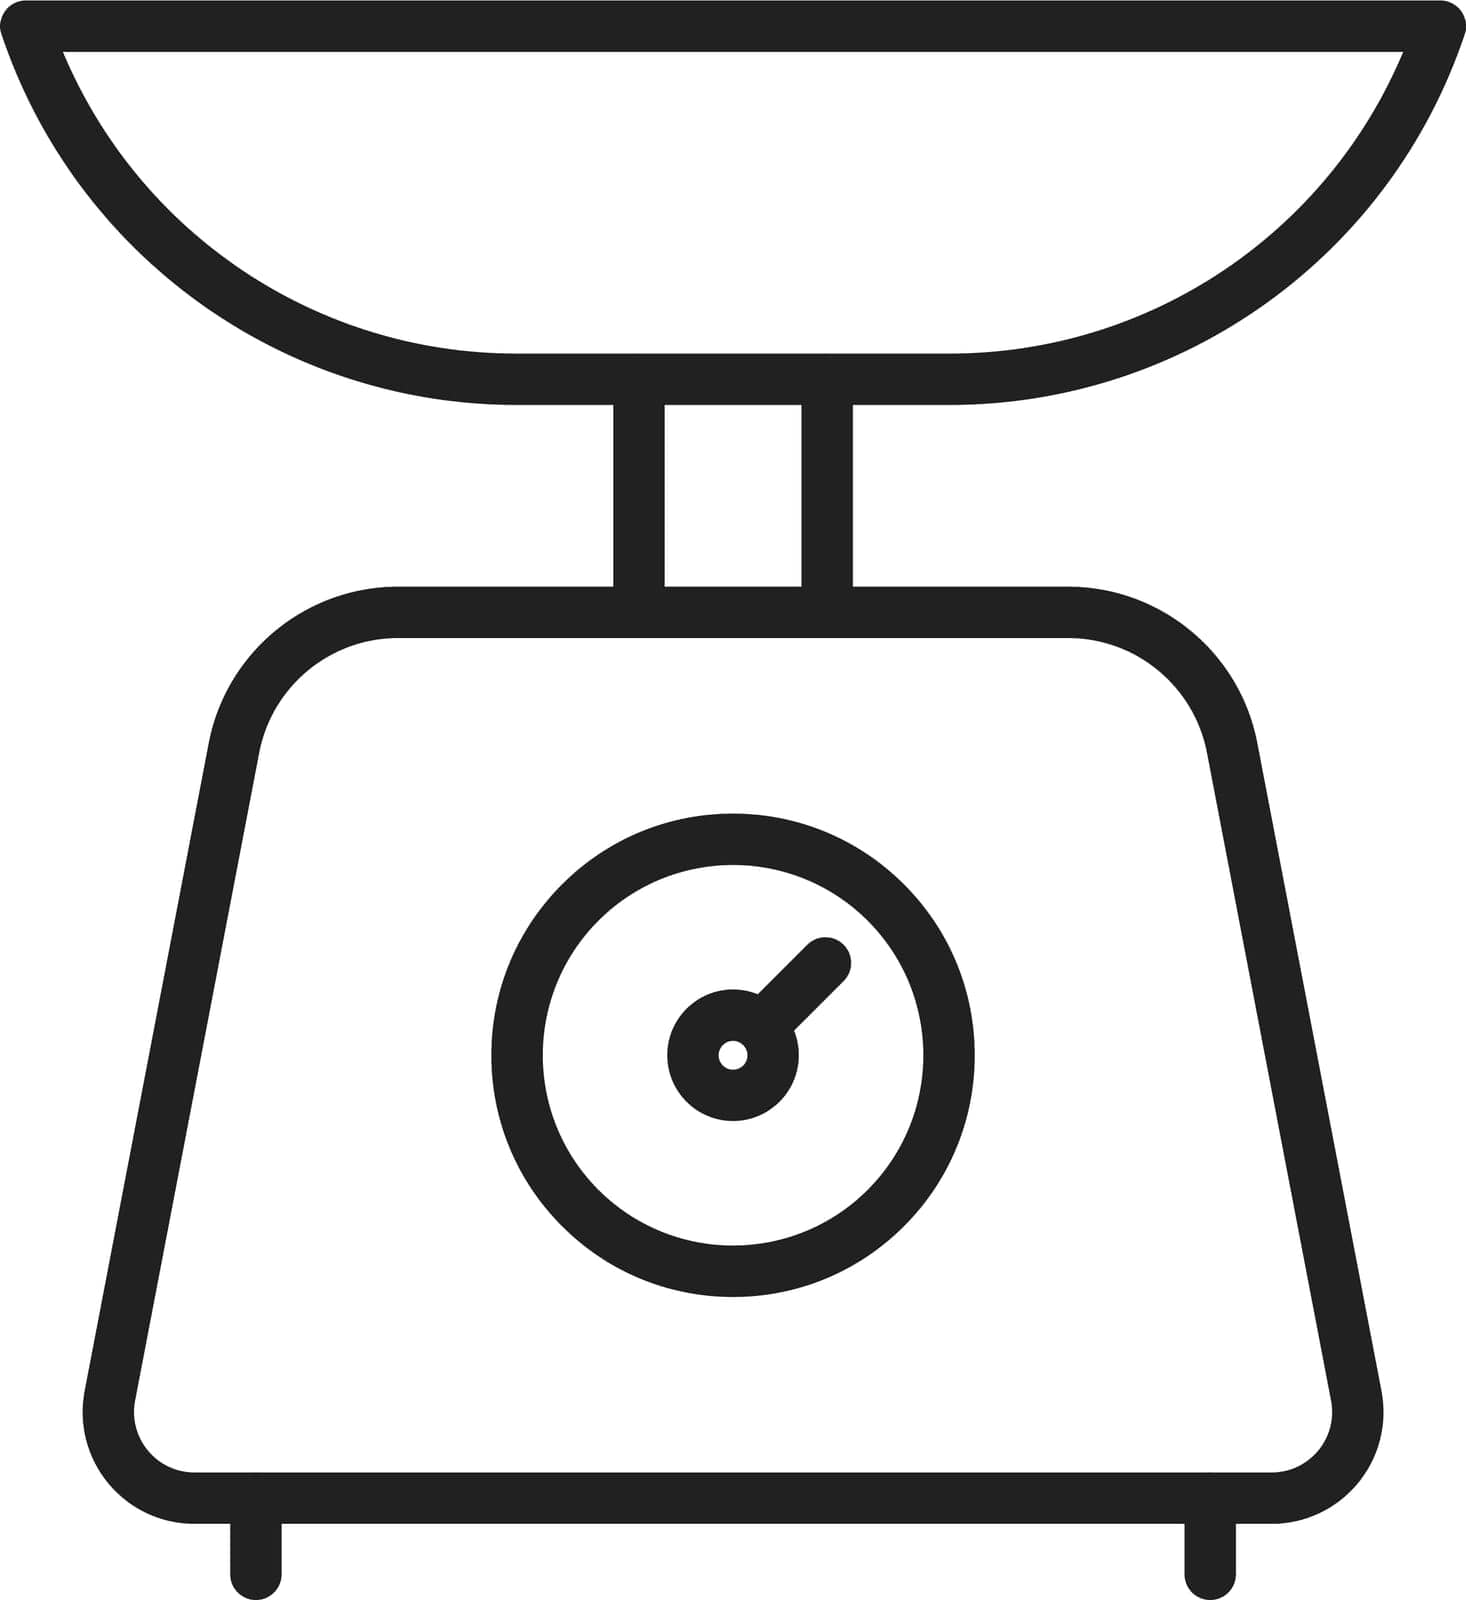 Weighing Scale Icon Image. by ICONBUNNY